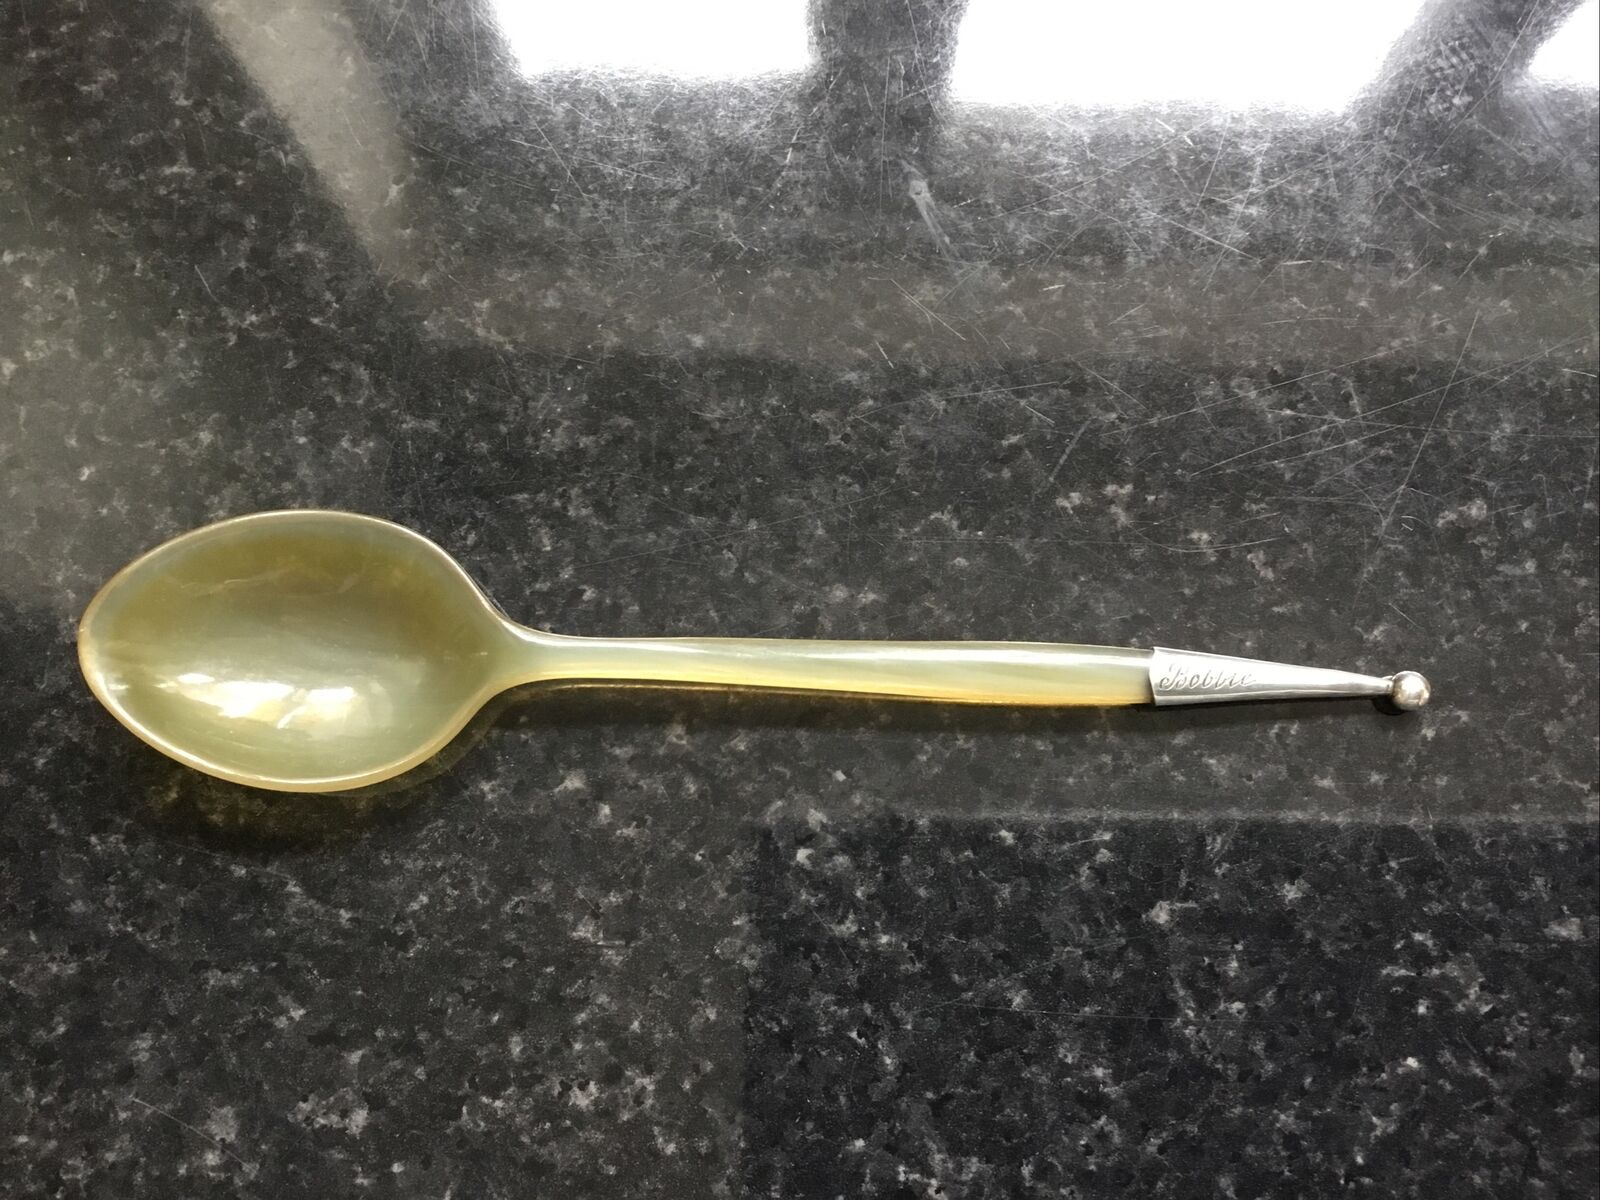 1907 Solid Silver Tipped Handle Bakelite/Celluloid Spoon Hallmark